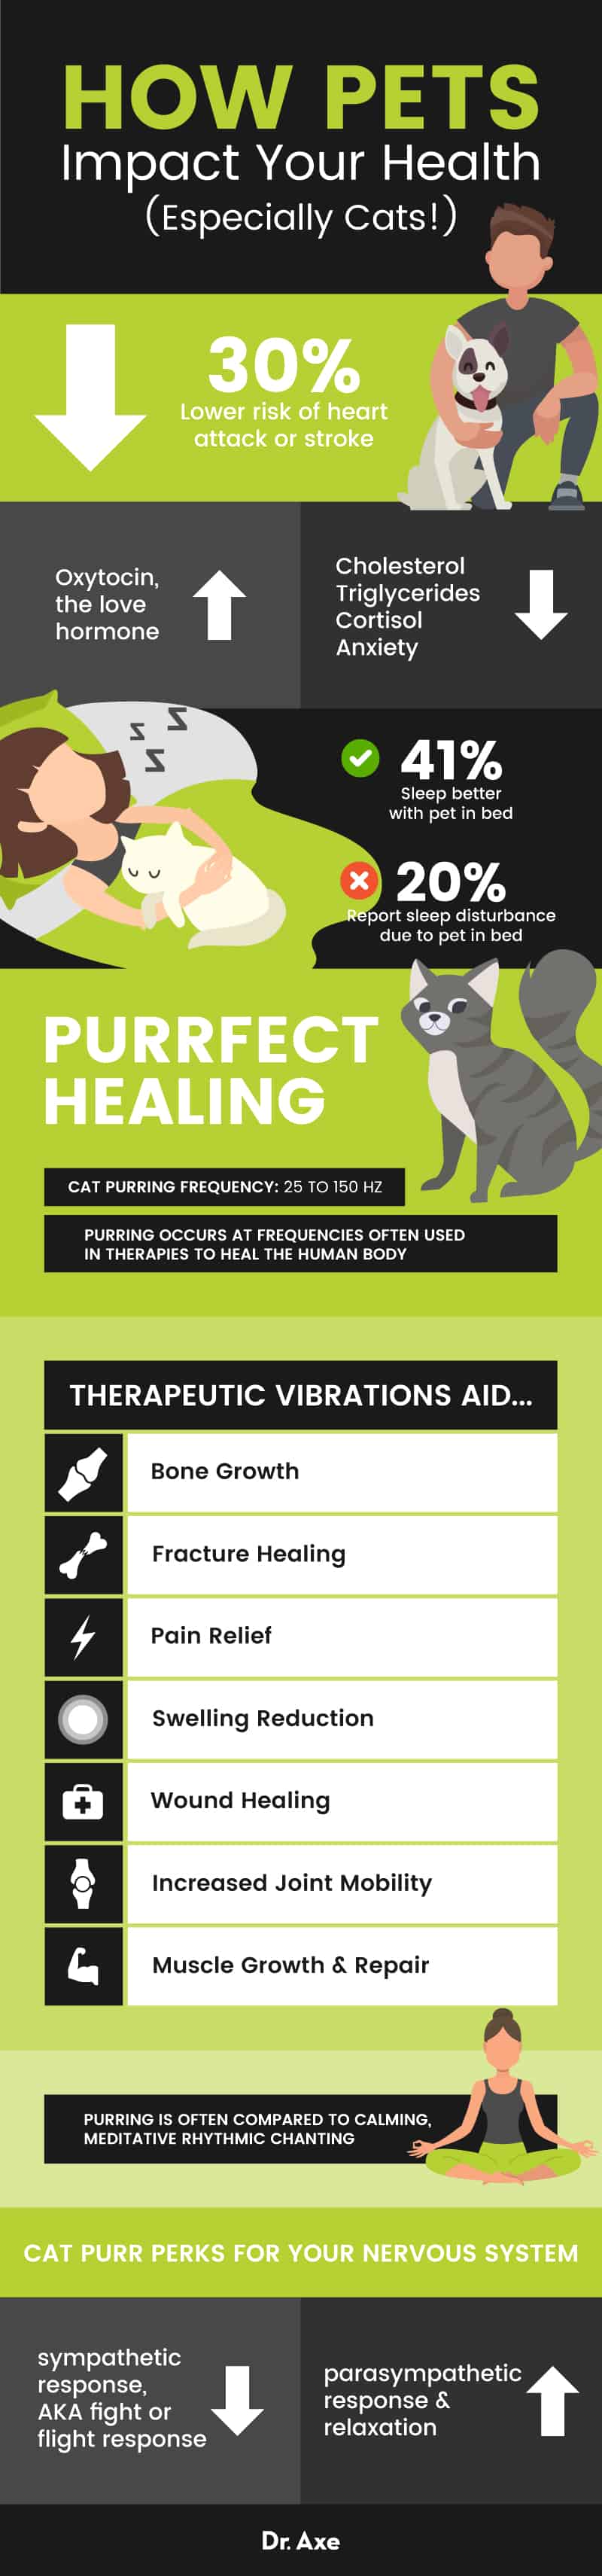 Health benefits of owning a pet - Dr. Axe